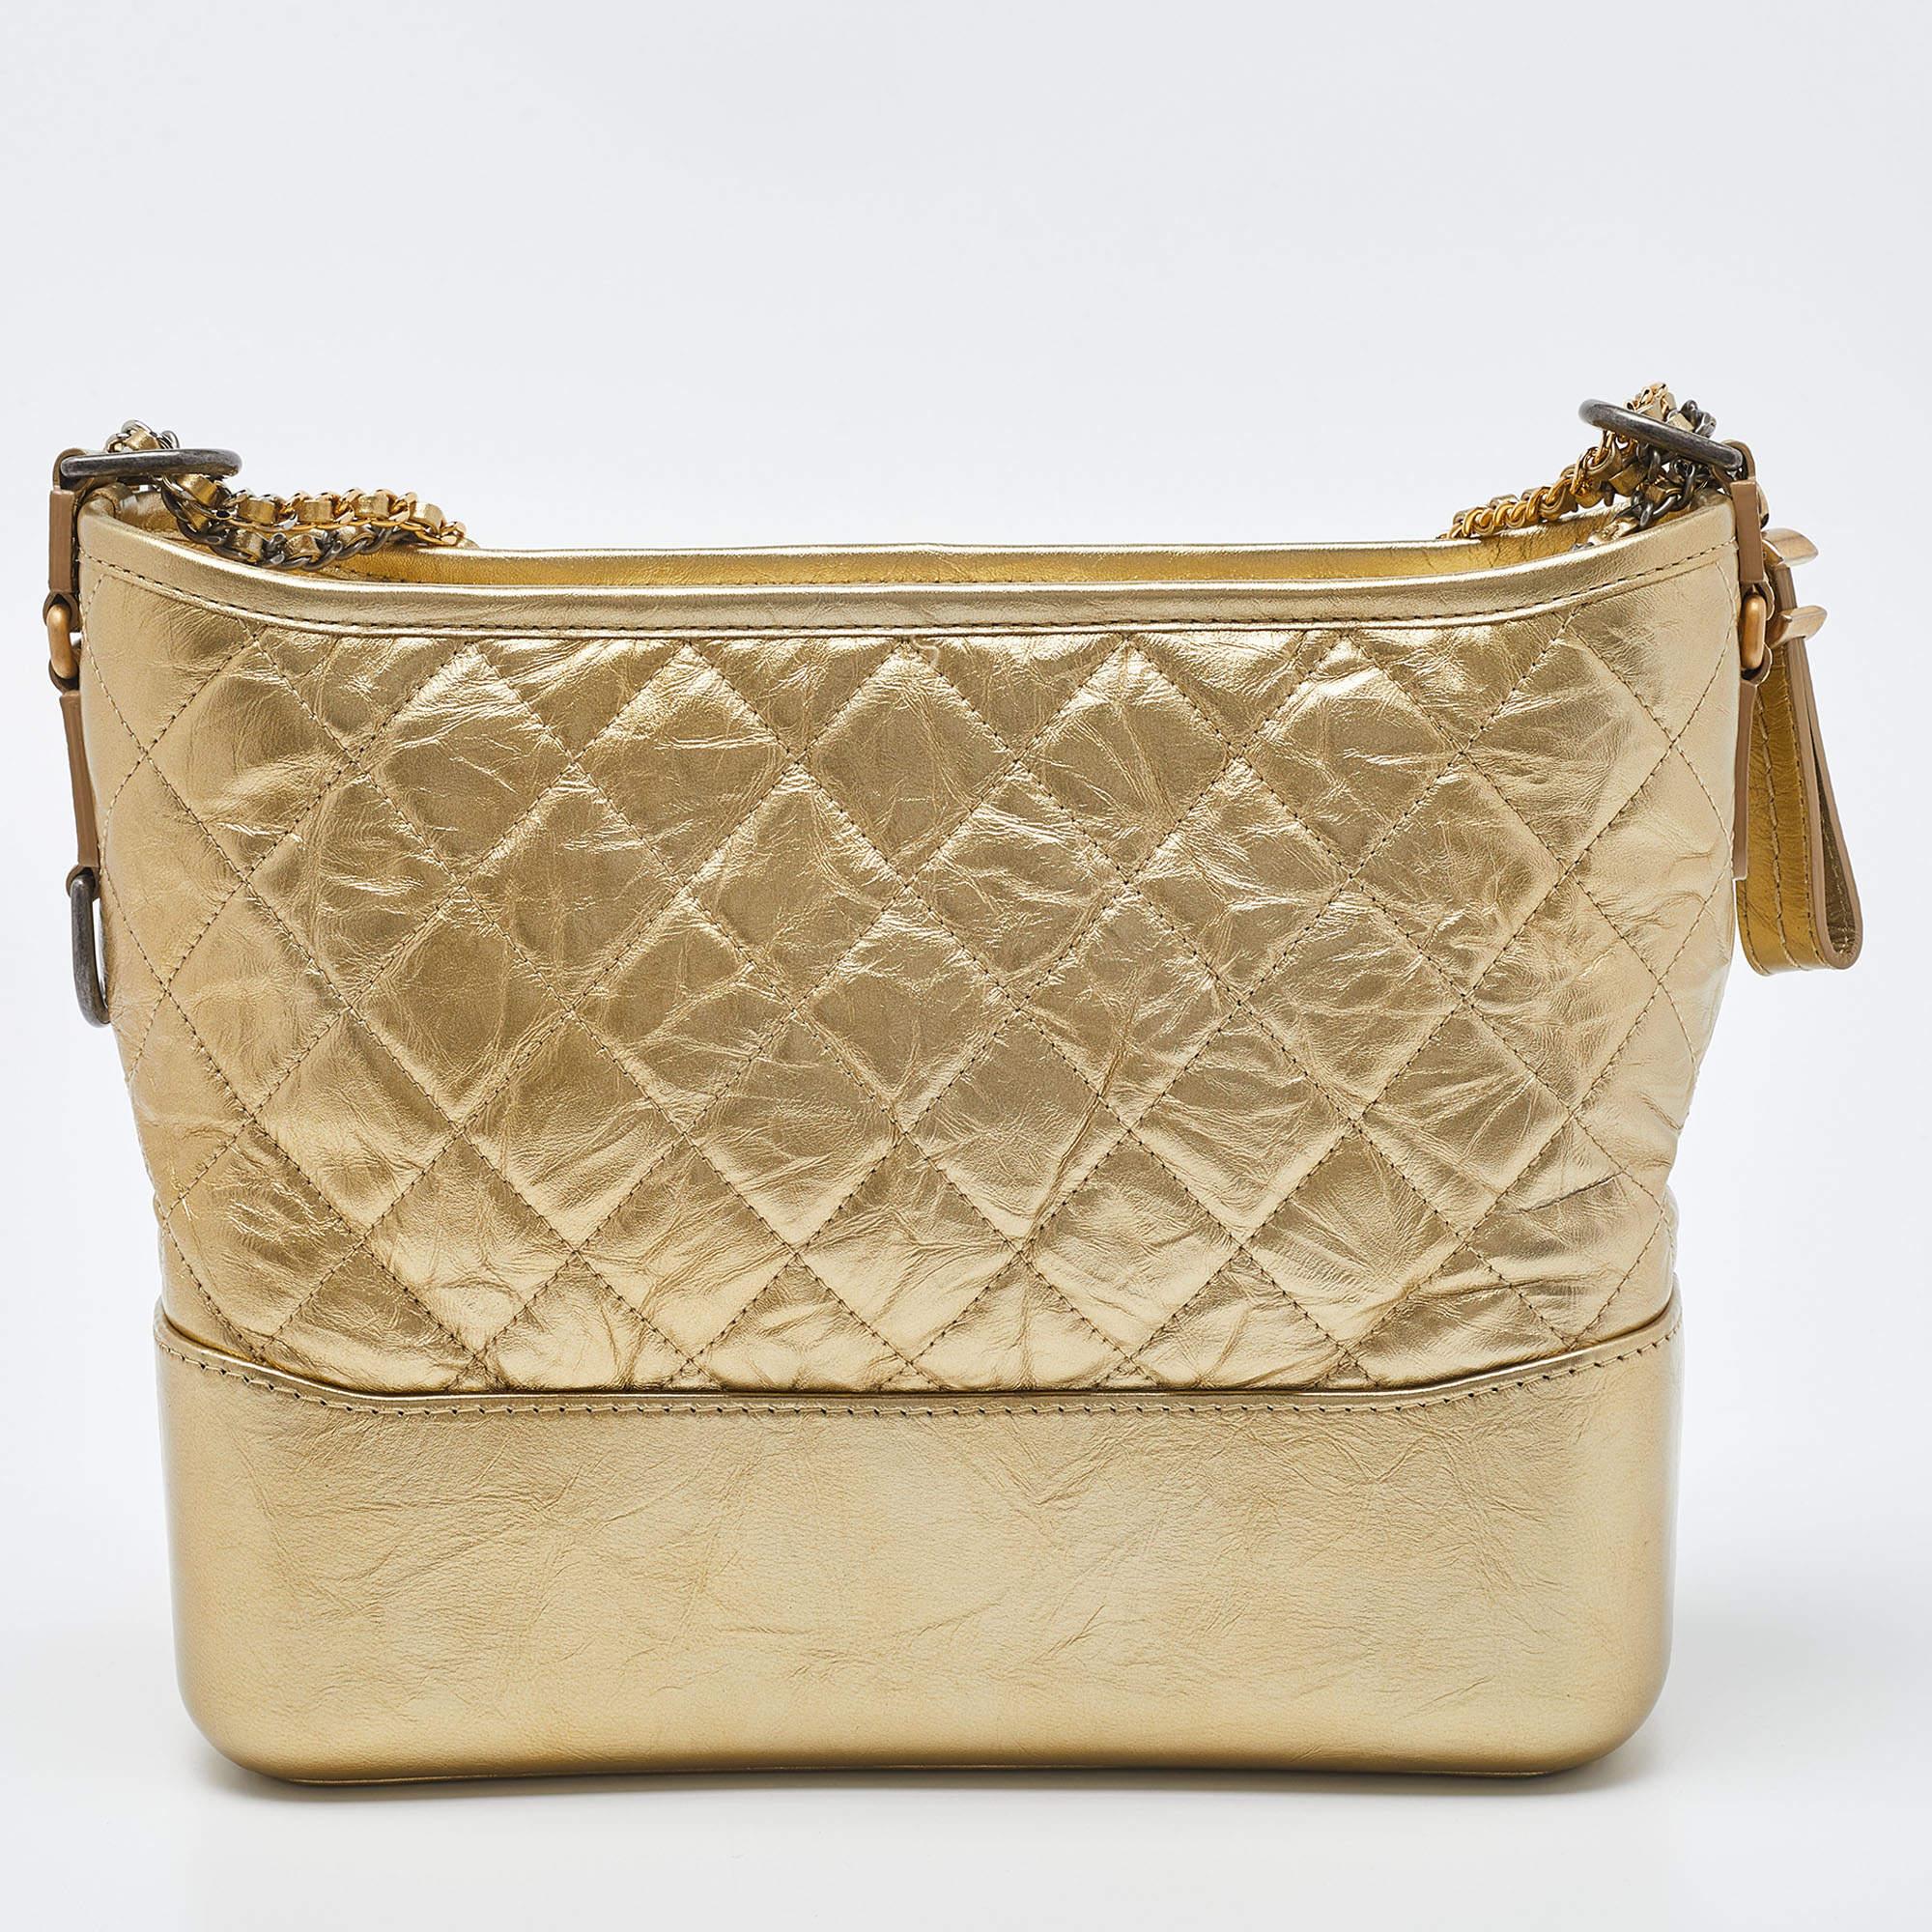 The Chanel Gabrielle hobo exudes timeless elegance. Crafted from luxurious quilted leather, its medium size strikes a perfect balance between functionality and style. The iconic chain strap adds a touch of edgy sophistication, while the gold hue